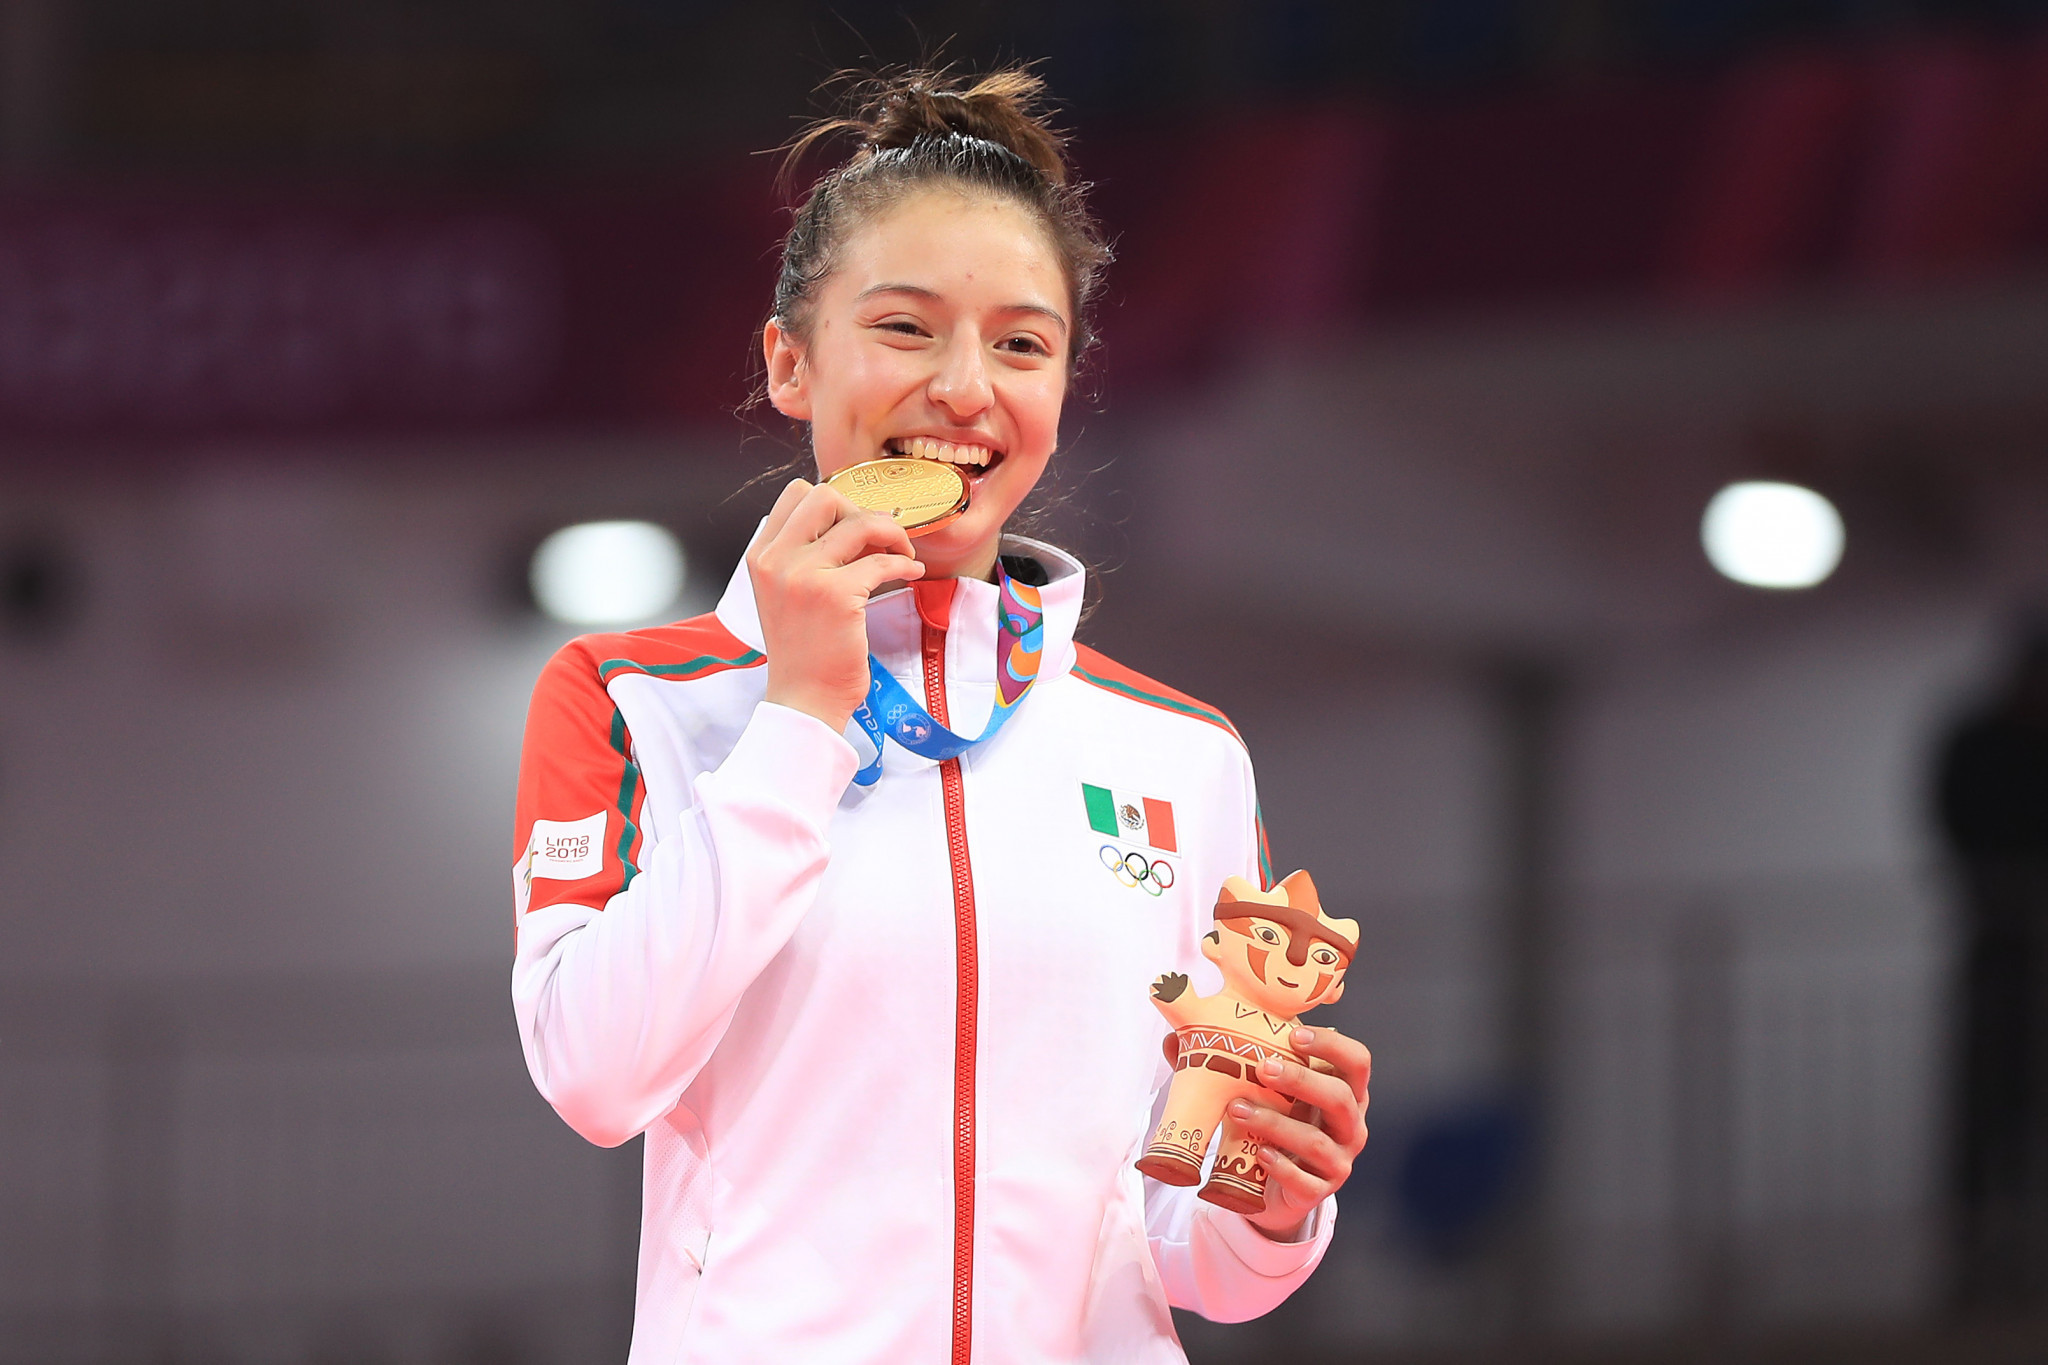 Pan American Games champion Daniela Souza is among the athletes to qualify for Mexico's team for the Pan American Taekwondo Championships next month ©Getty Images